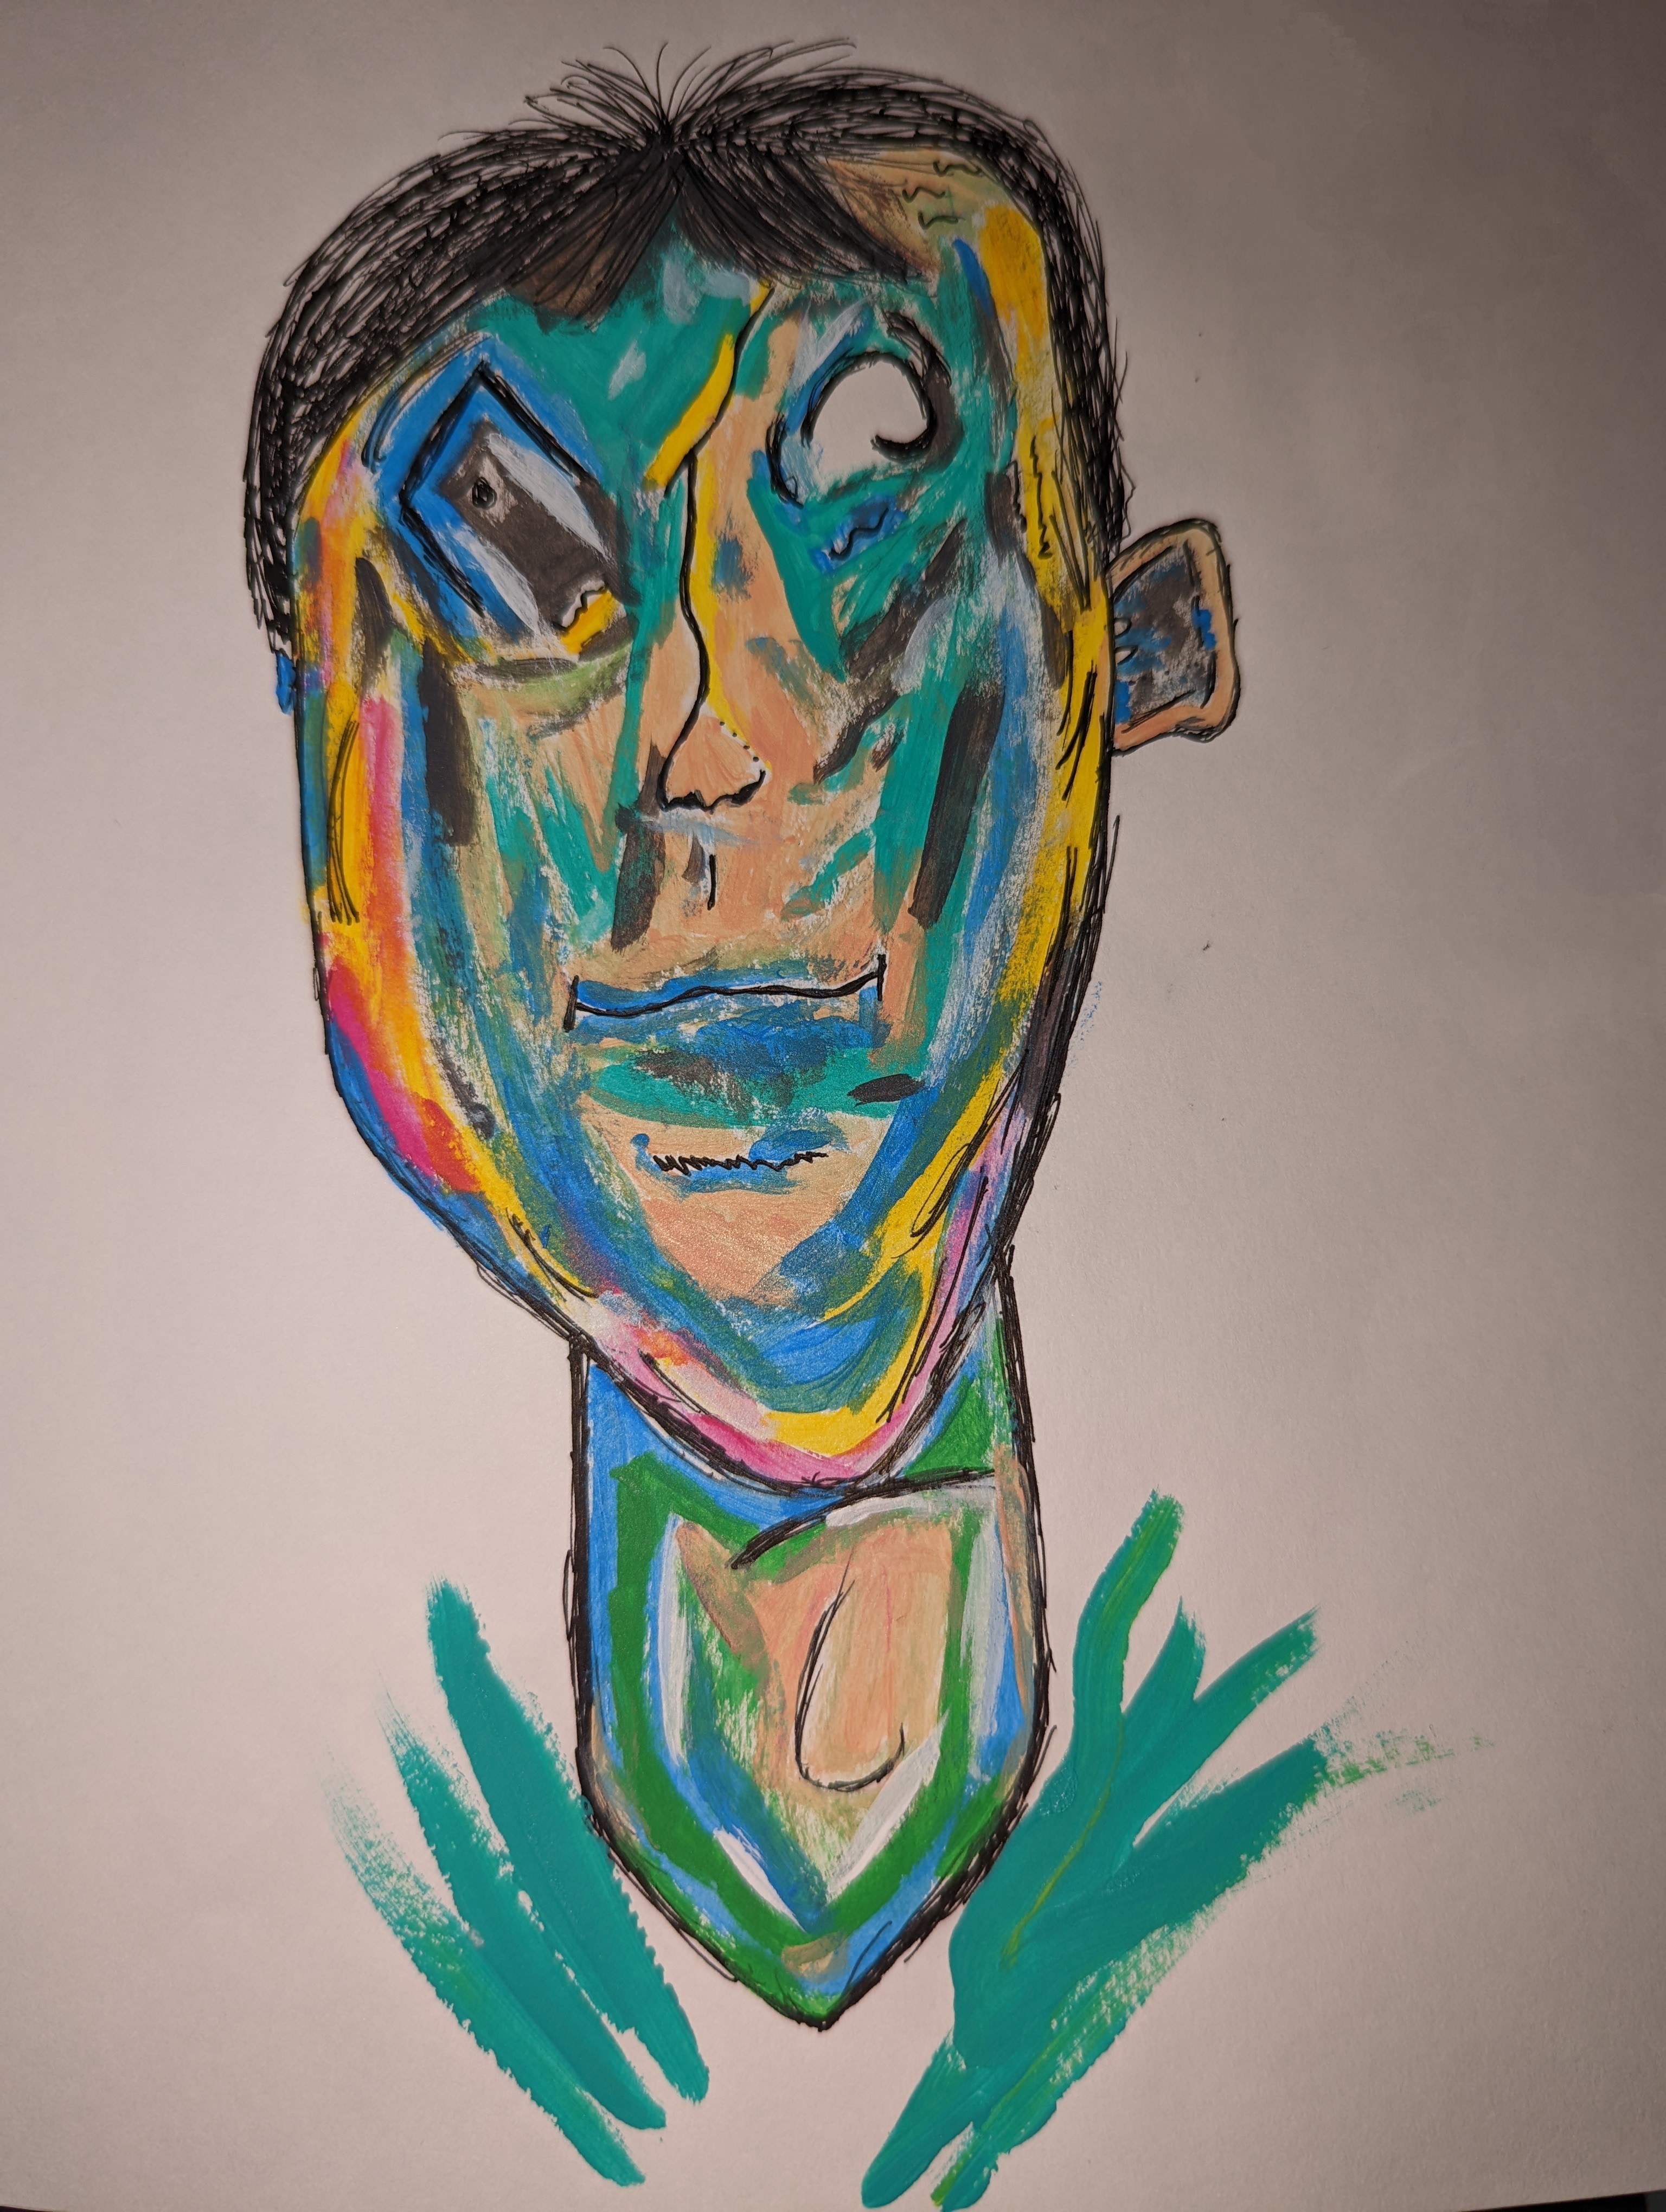  sketch of a man made with acrylic paint. yellow, green, nude, and pink colors.